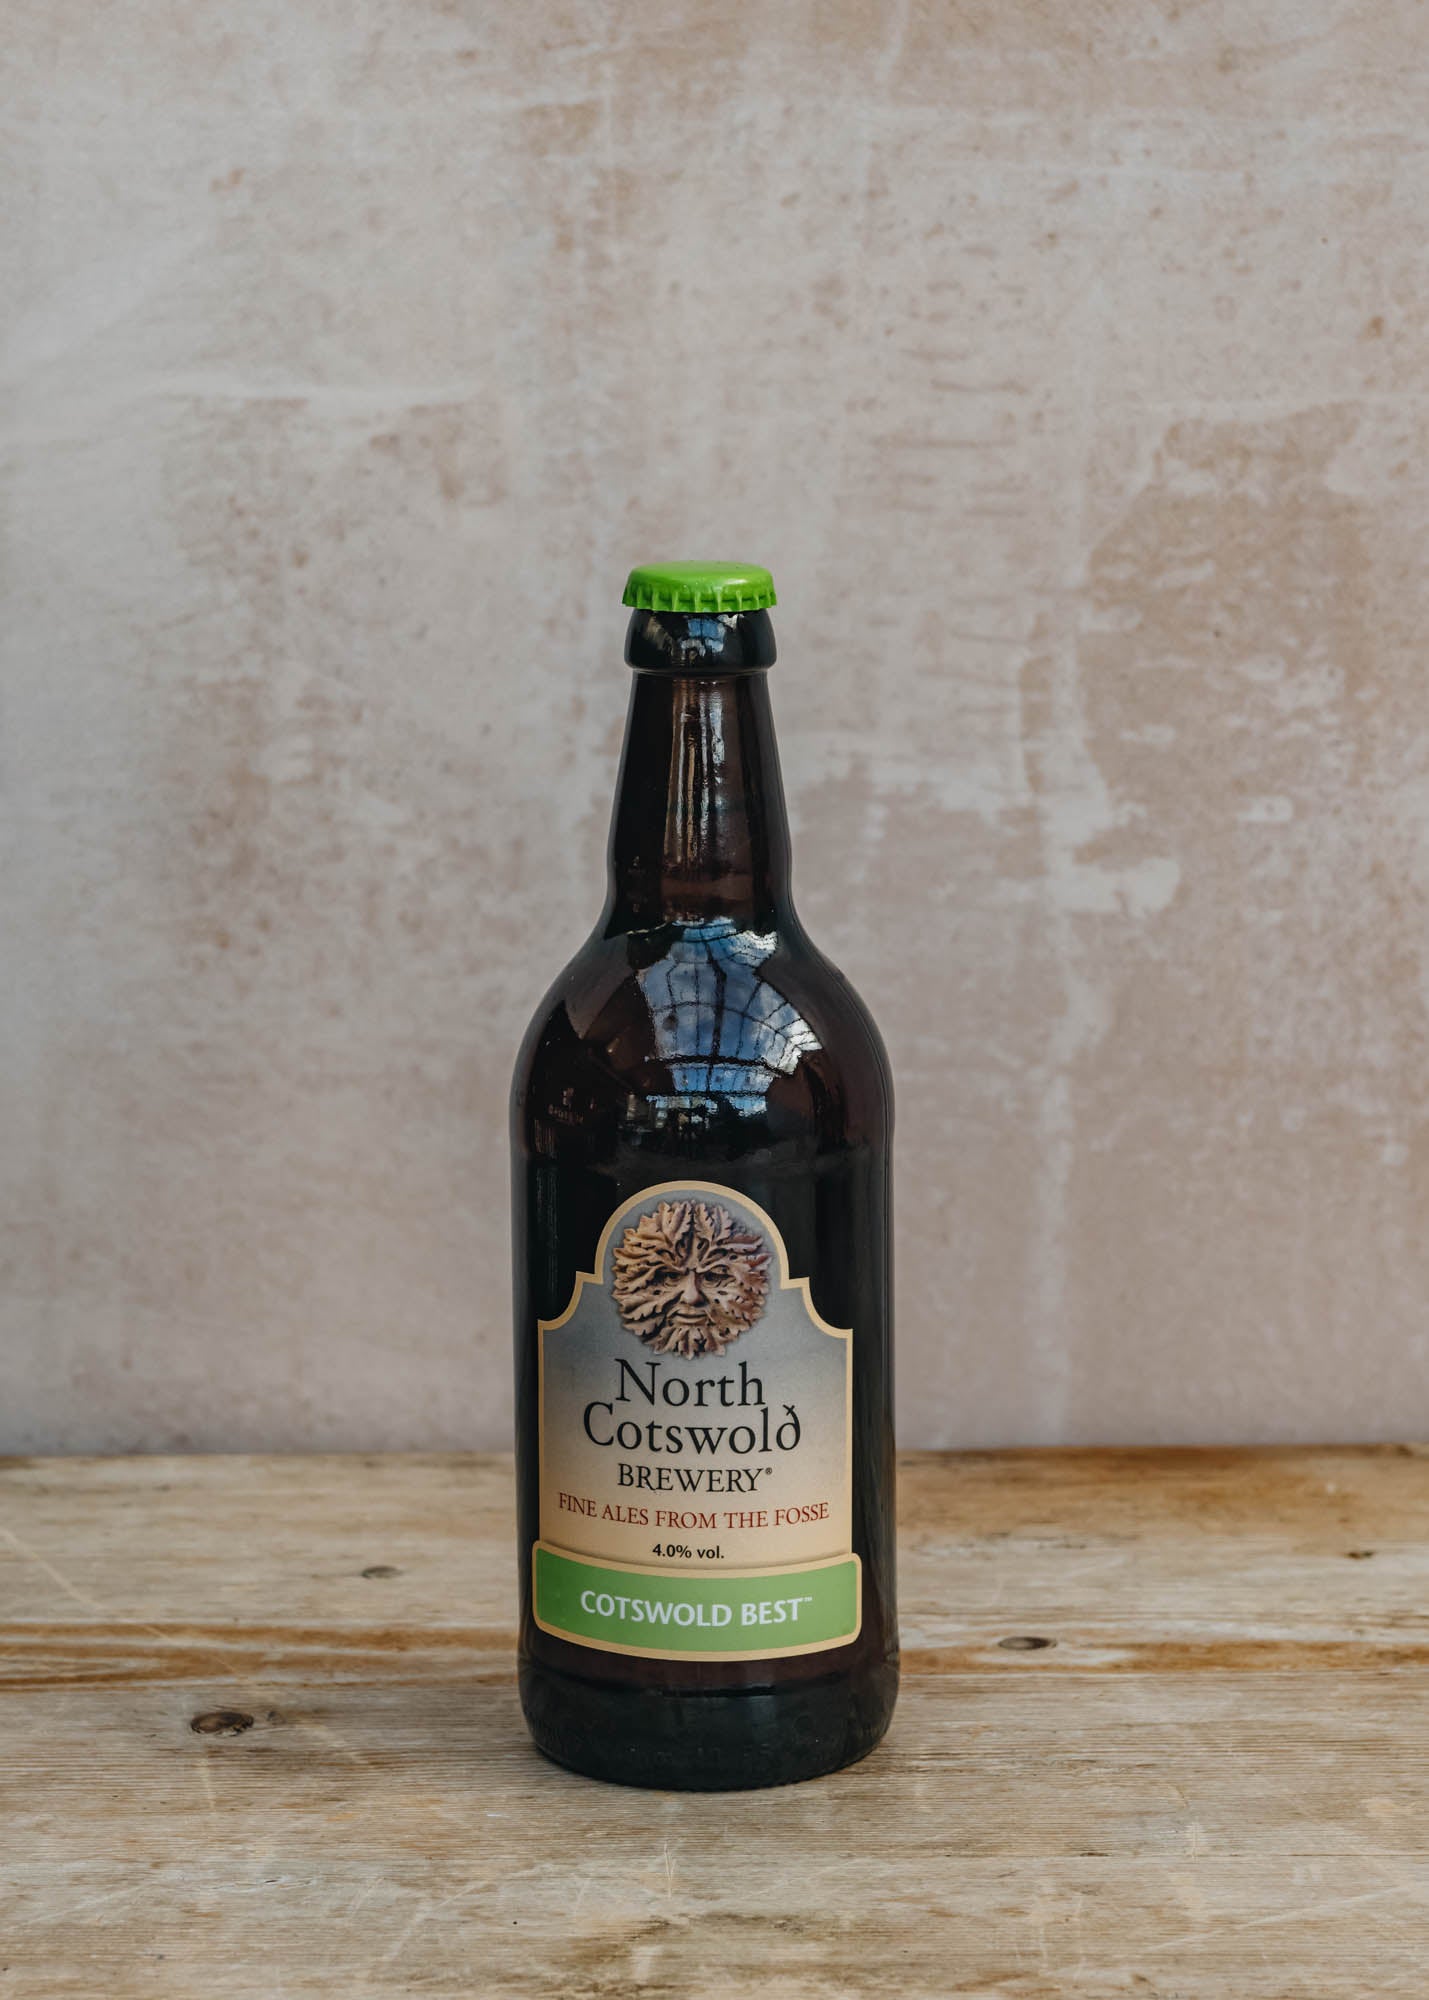 North Cotswold Brewery Cotswold Best, 500ml